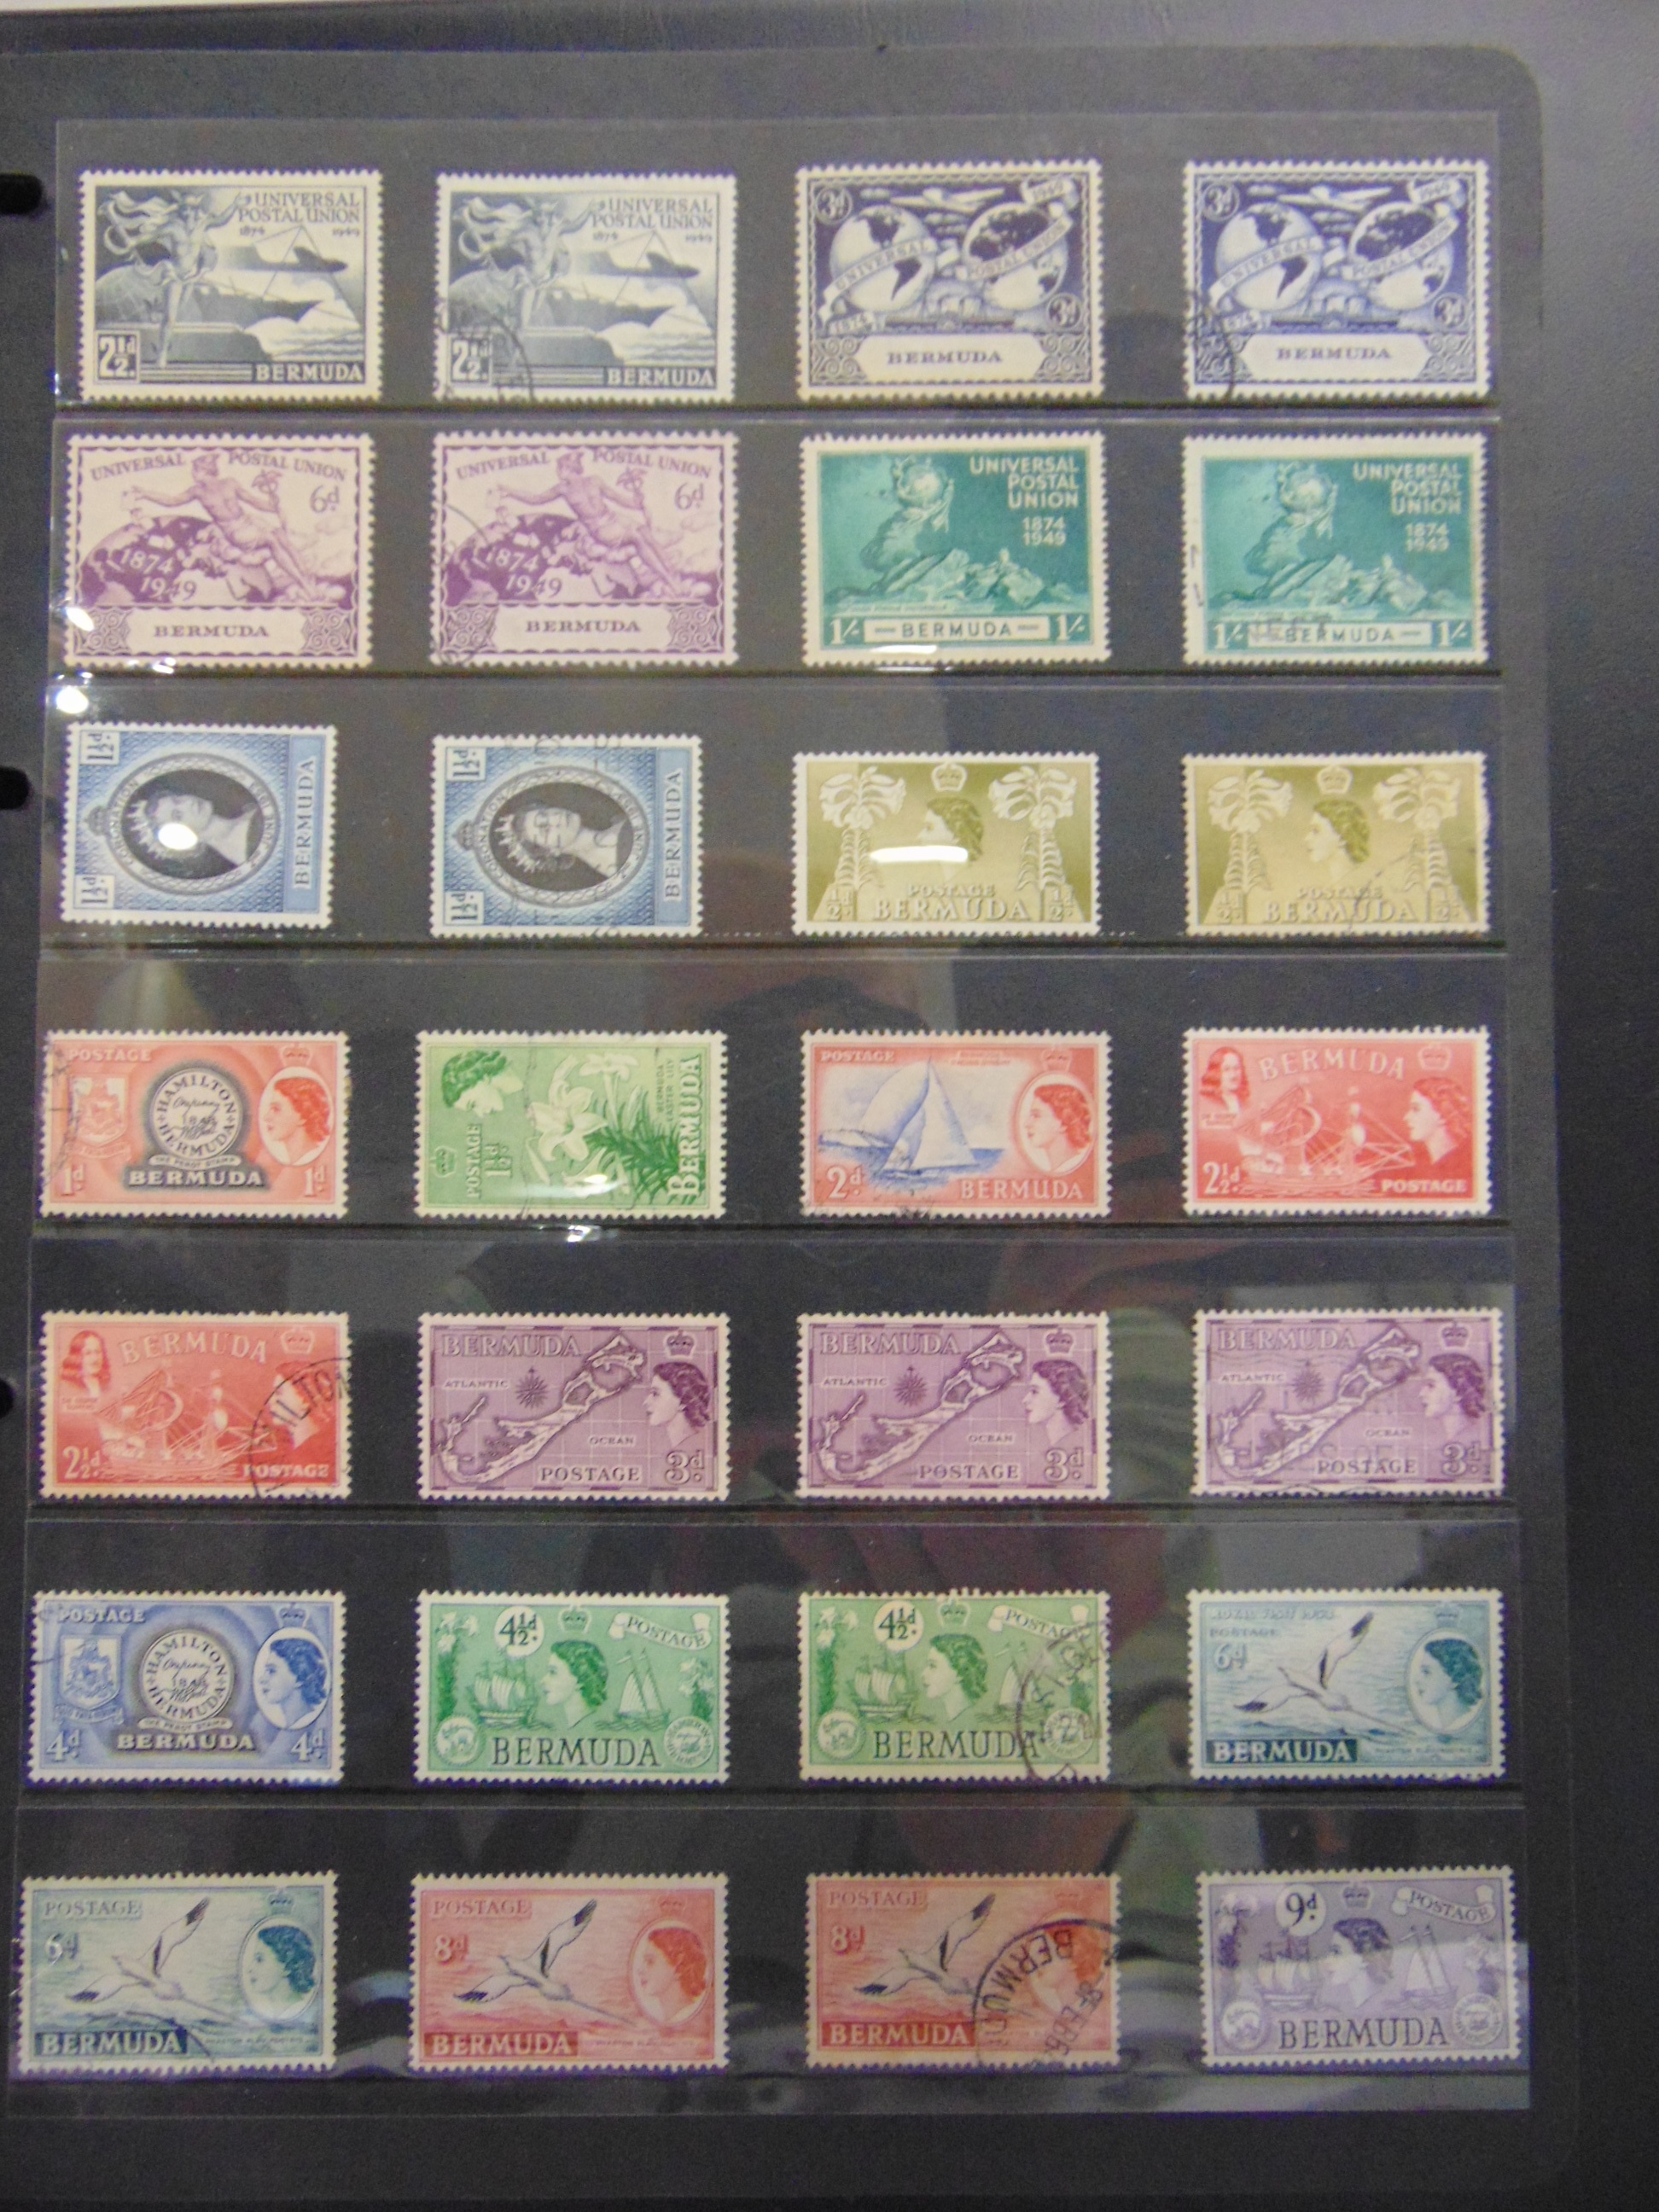 STAMPS - A PART-WORLD COLLECTION including Antigua, Ascension, Bechuanaland, Botswana, Barbados, - Image 8 of 8